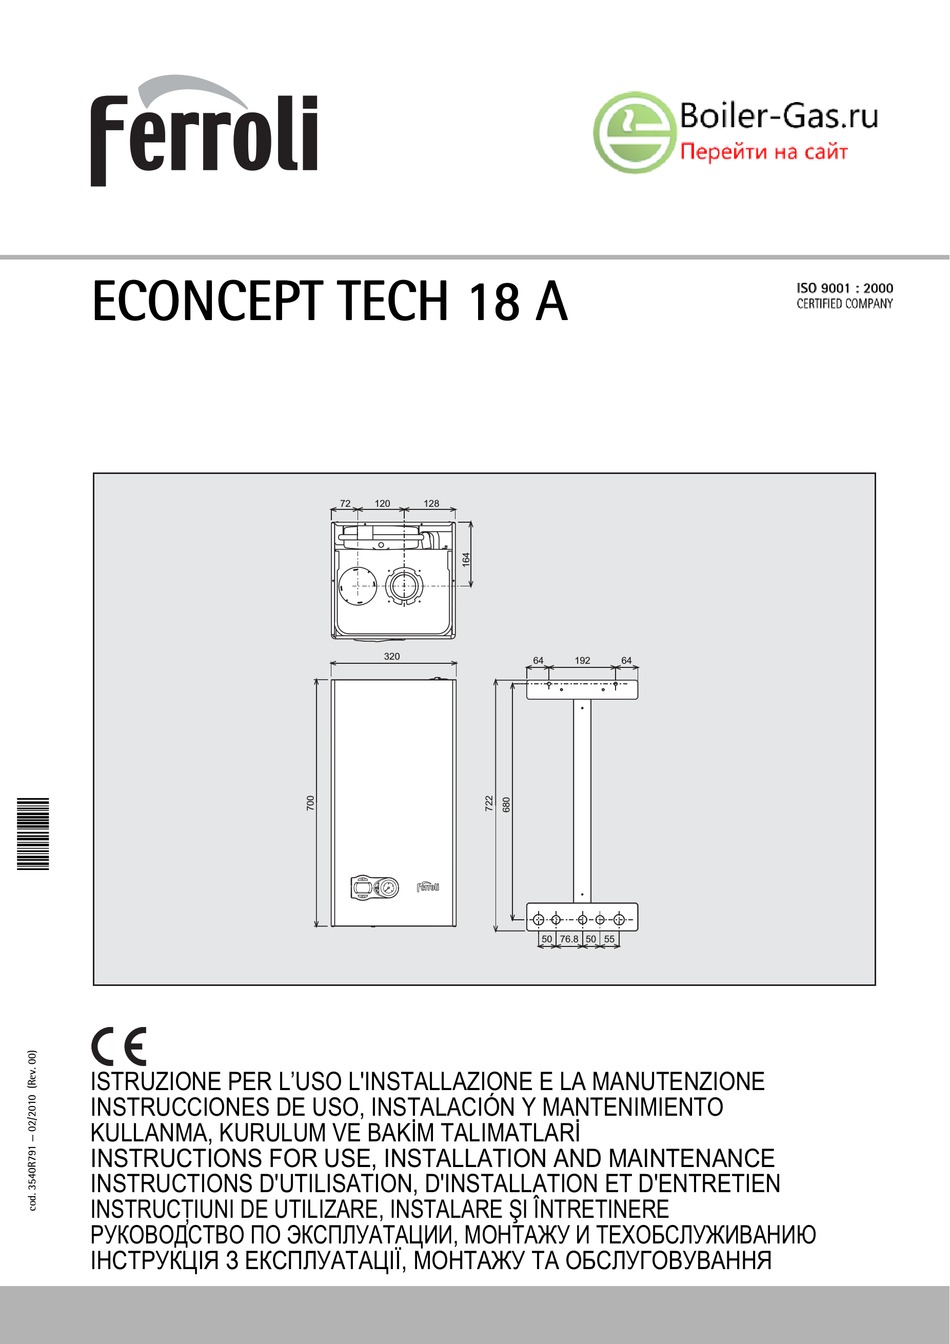 FERROLI ECONCEPT TECH 18 A INSTRUCTIONS FOR USE, INSTALLATION AND ...